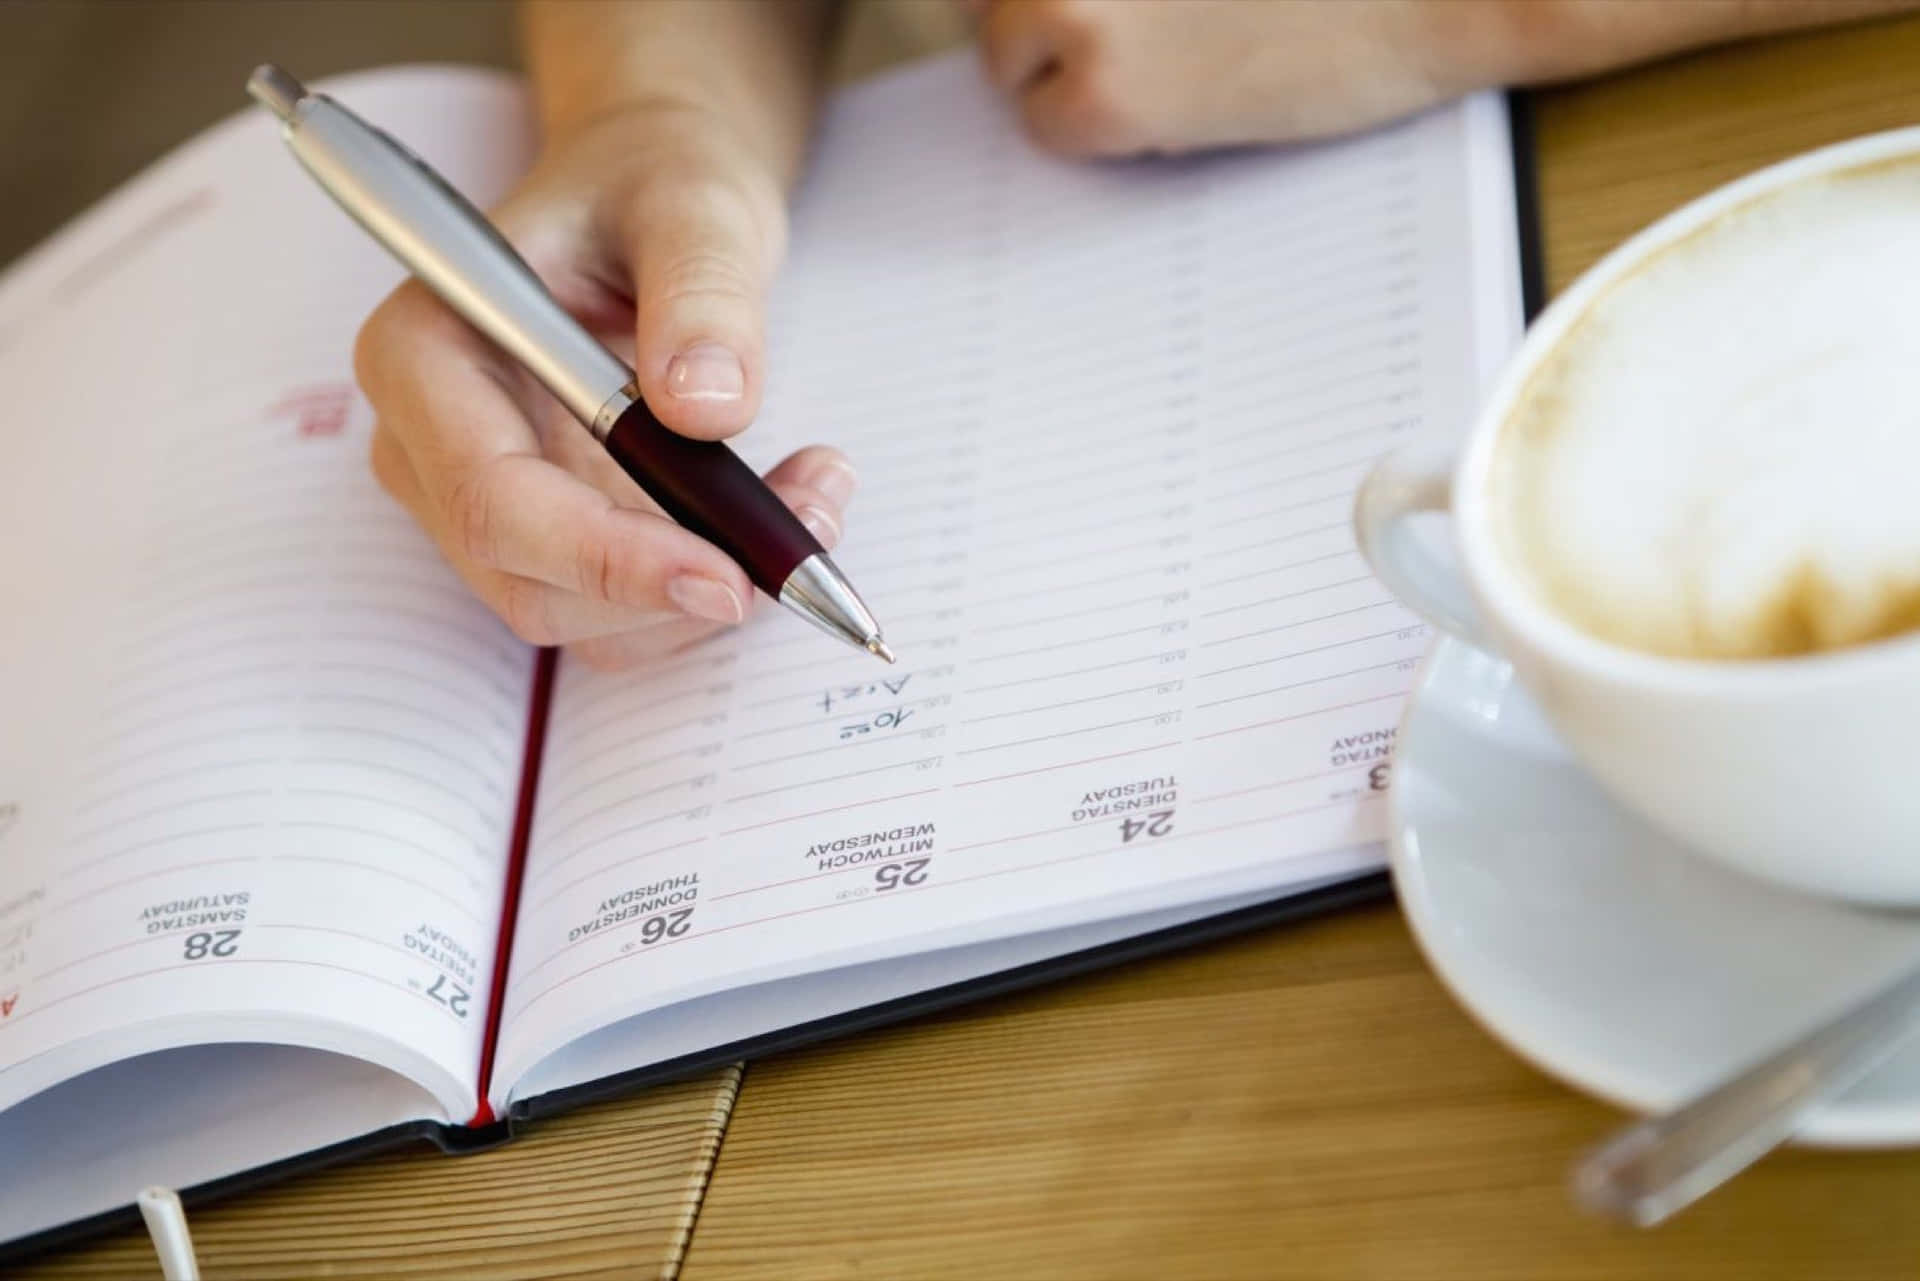 Take control of your day with a Planner